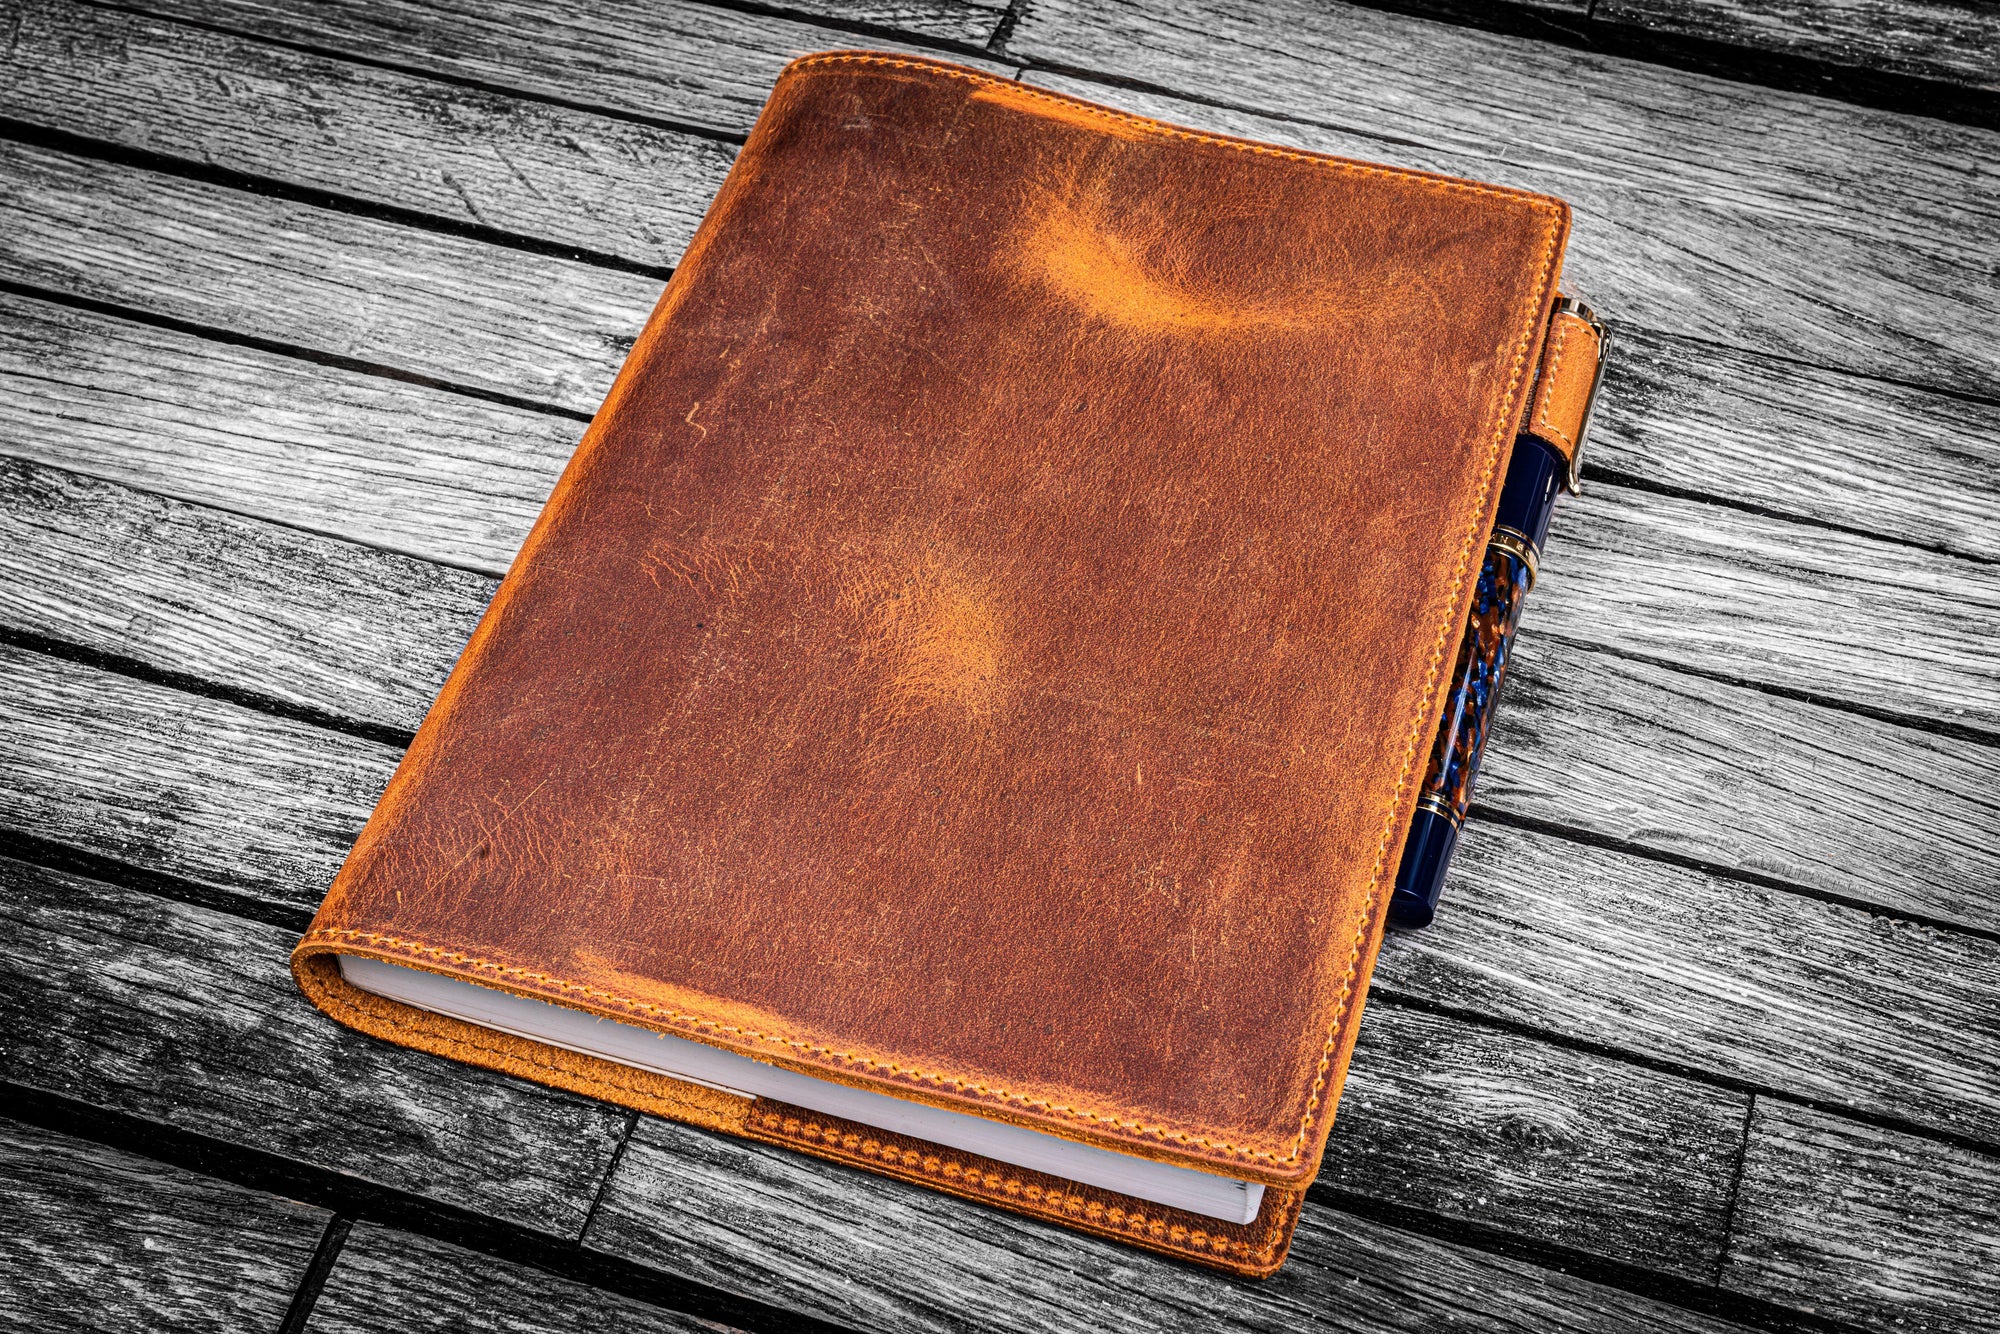  Vintage Leather Journal, Leather Notebook, Leather Journals  For Women, Vintage Journal, Leather Sketchbook